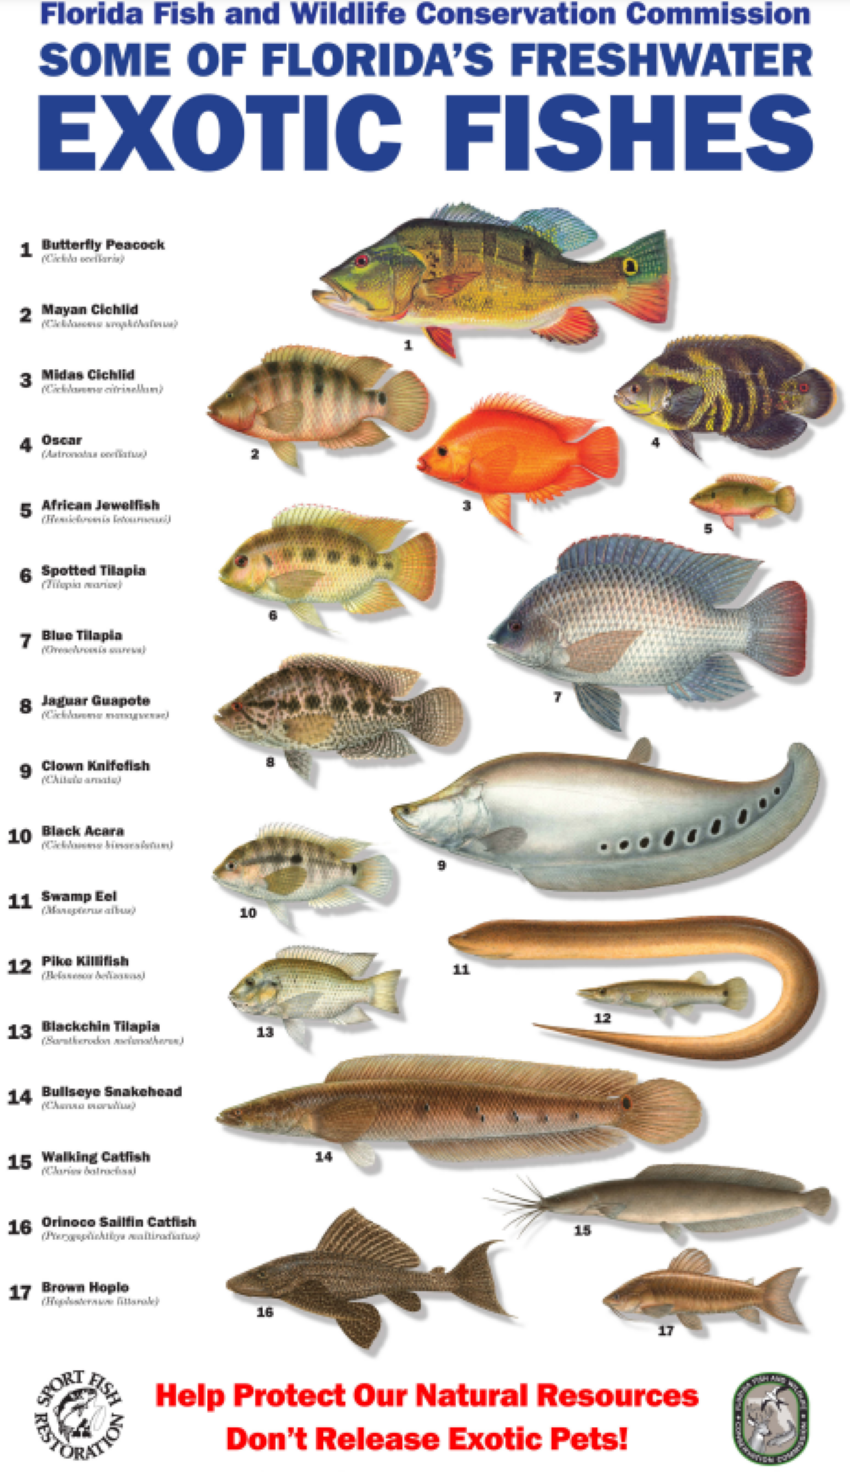 Florida's Exotic Freshwater Fish — Half Past First Cast